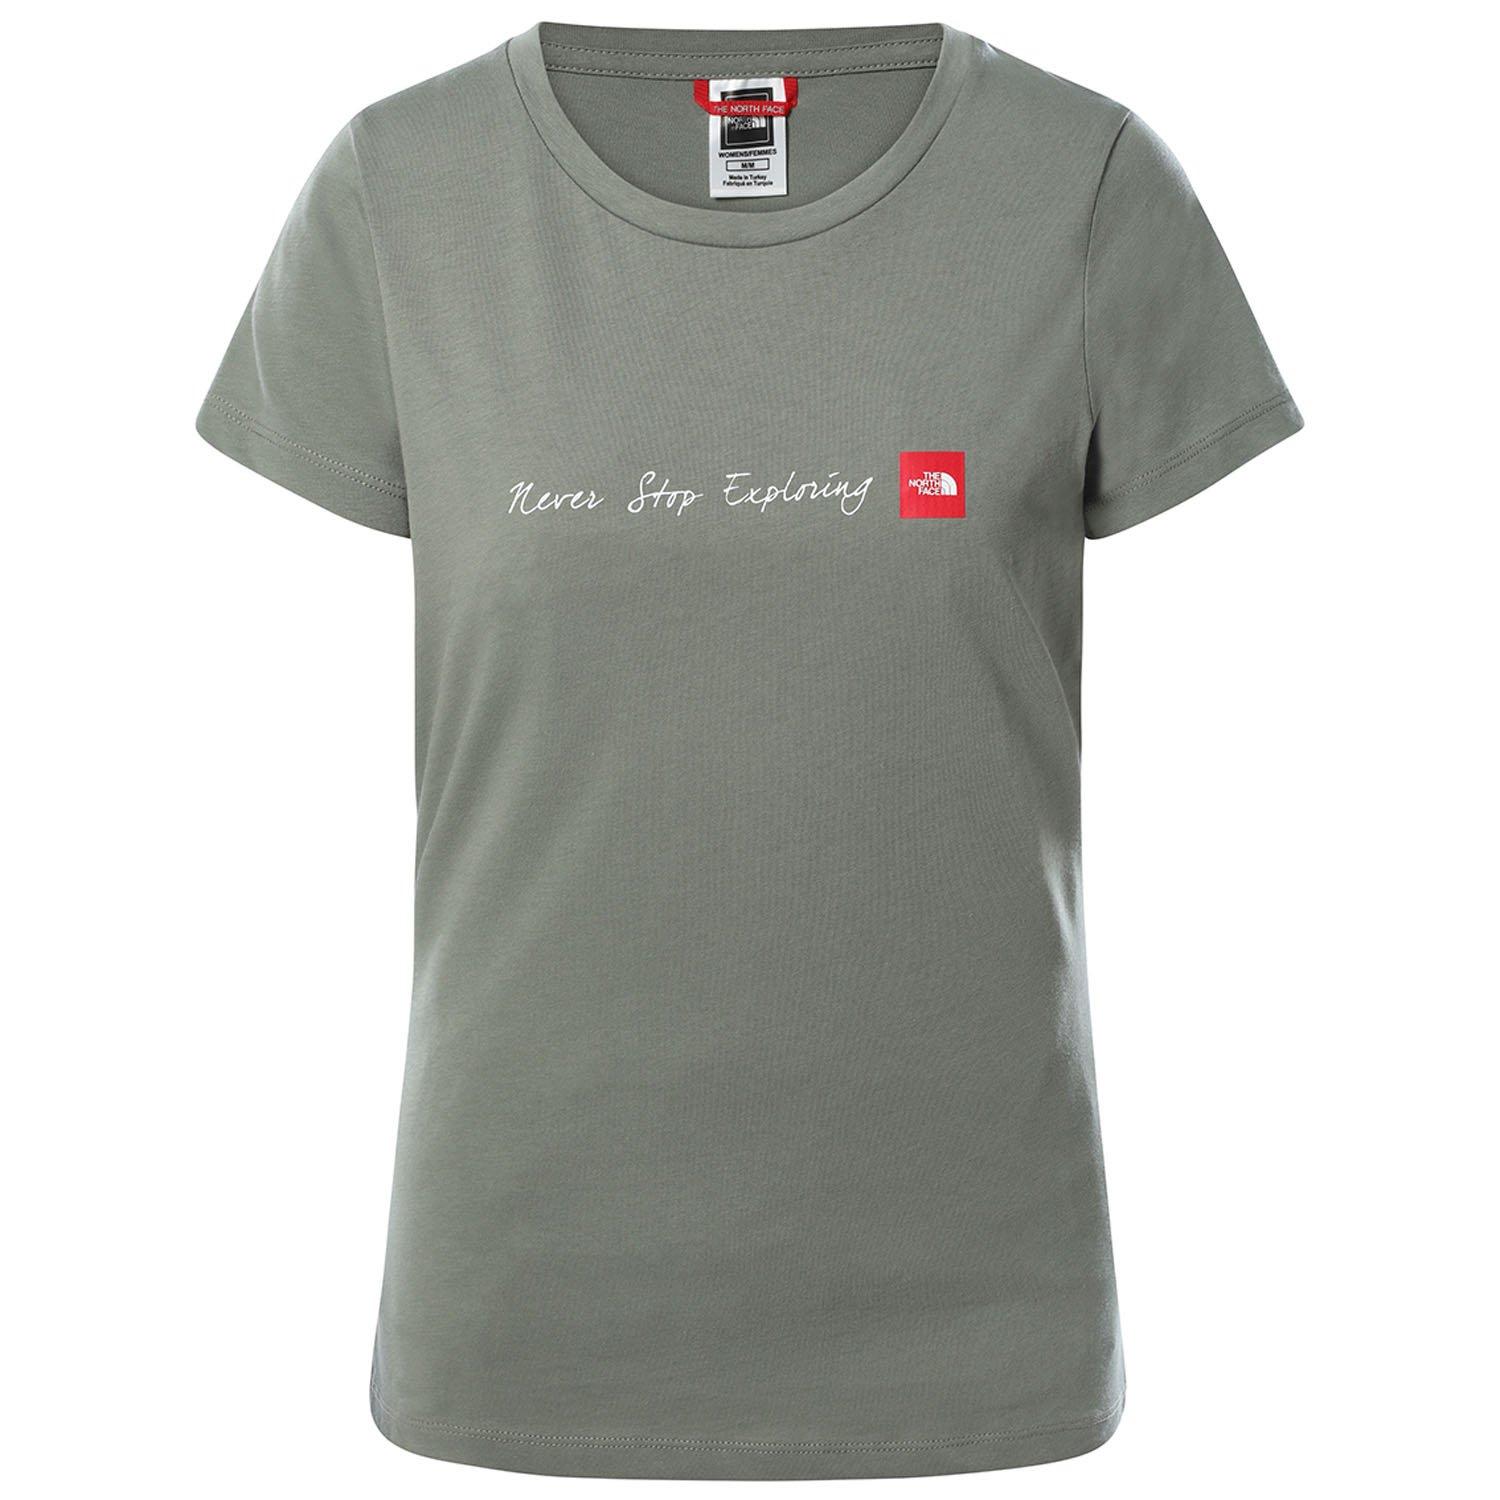 The North Face Women’s Never Stop Exploring T-Shirt